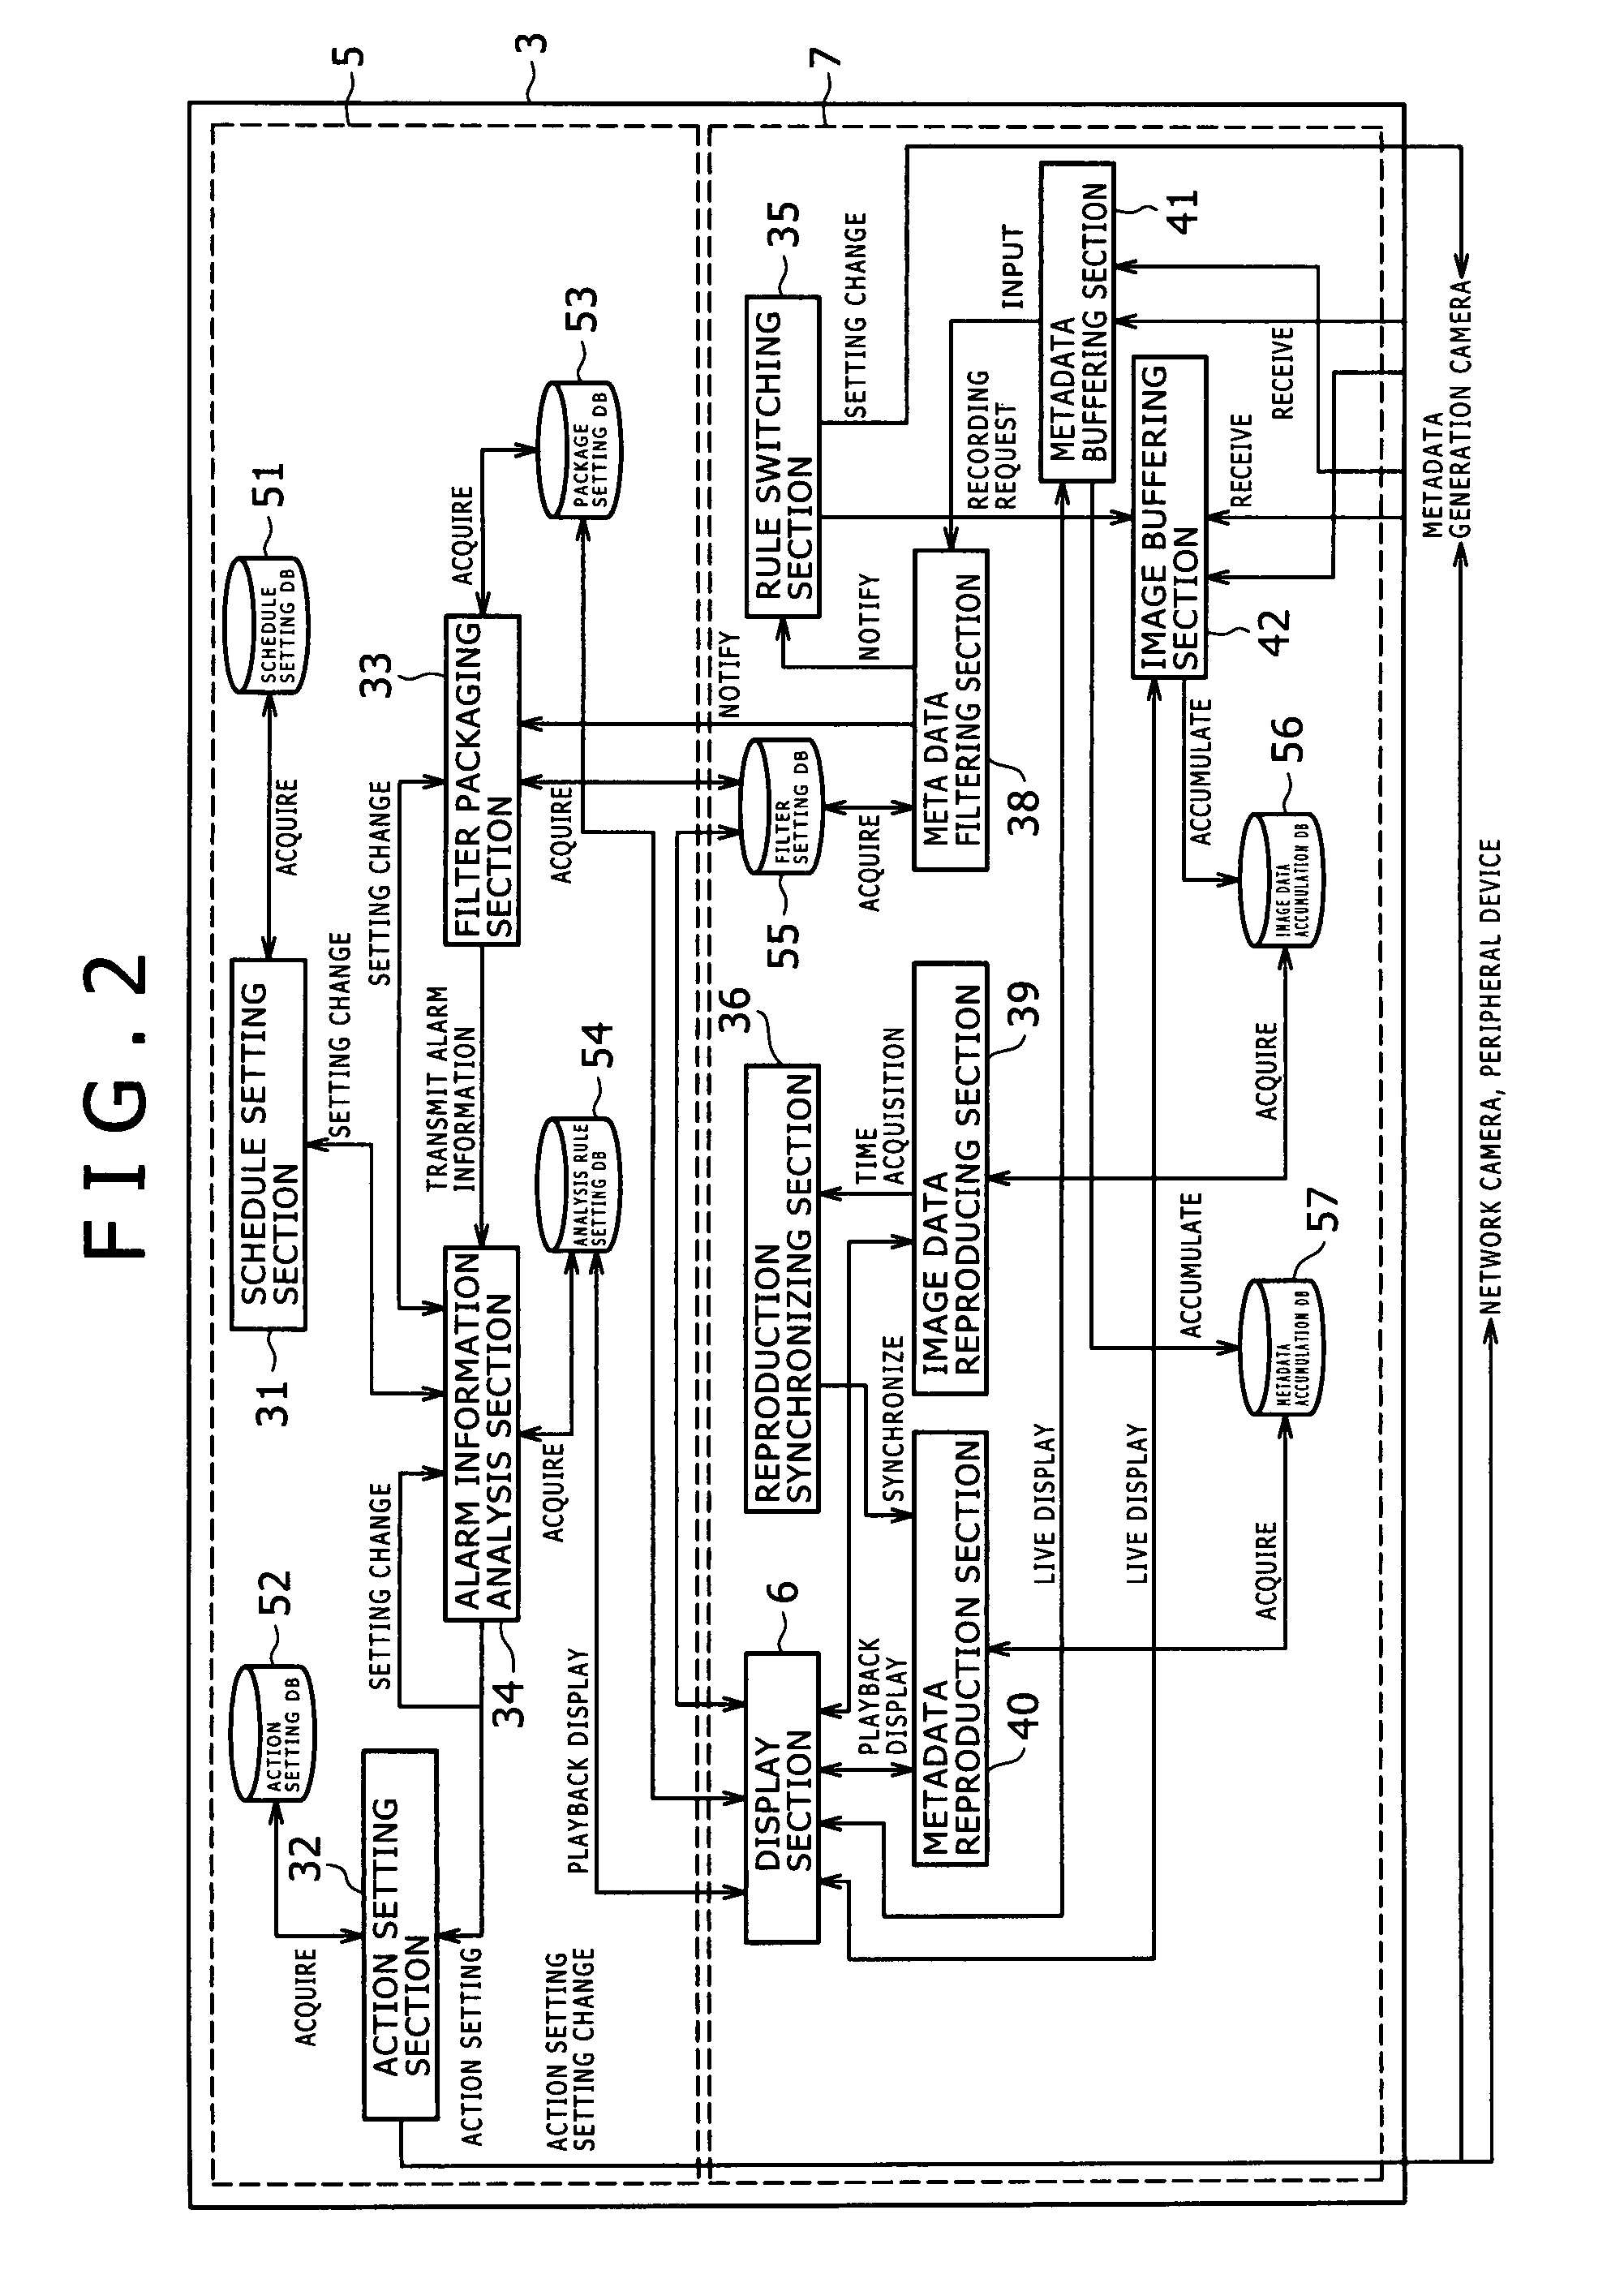 Image processing apparatus, image processing system, and filter setting method